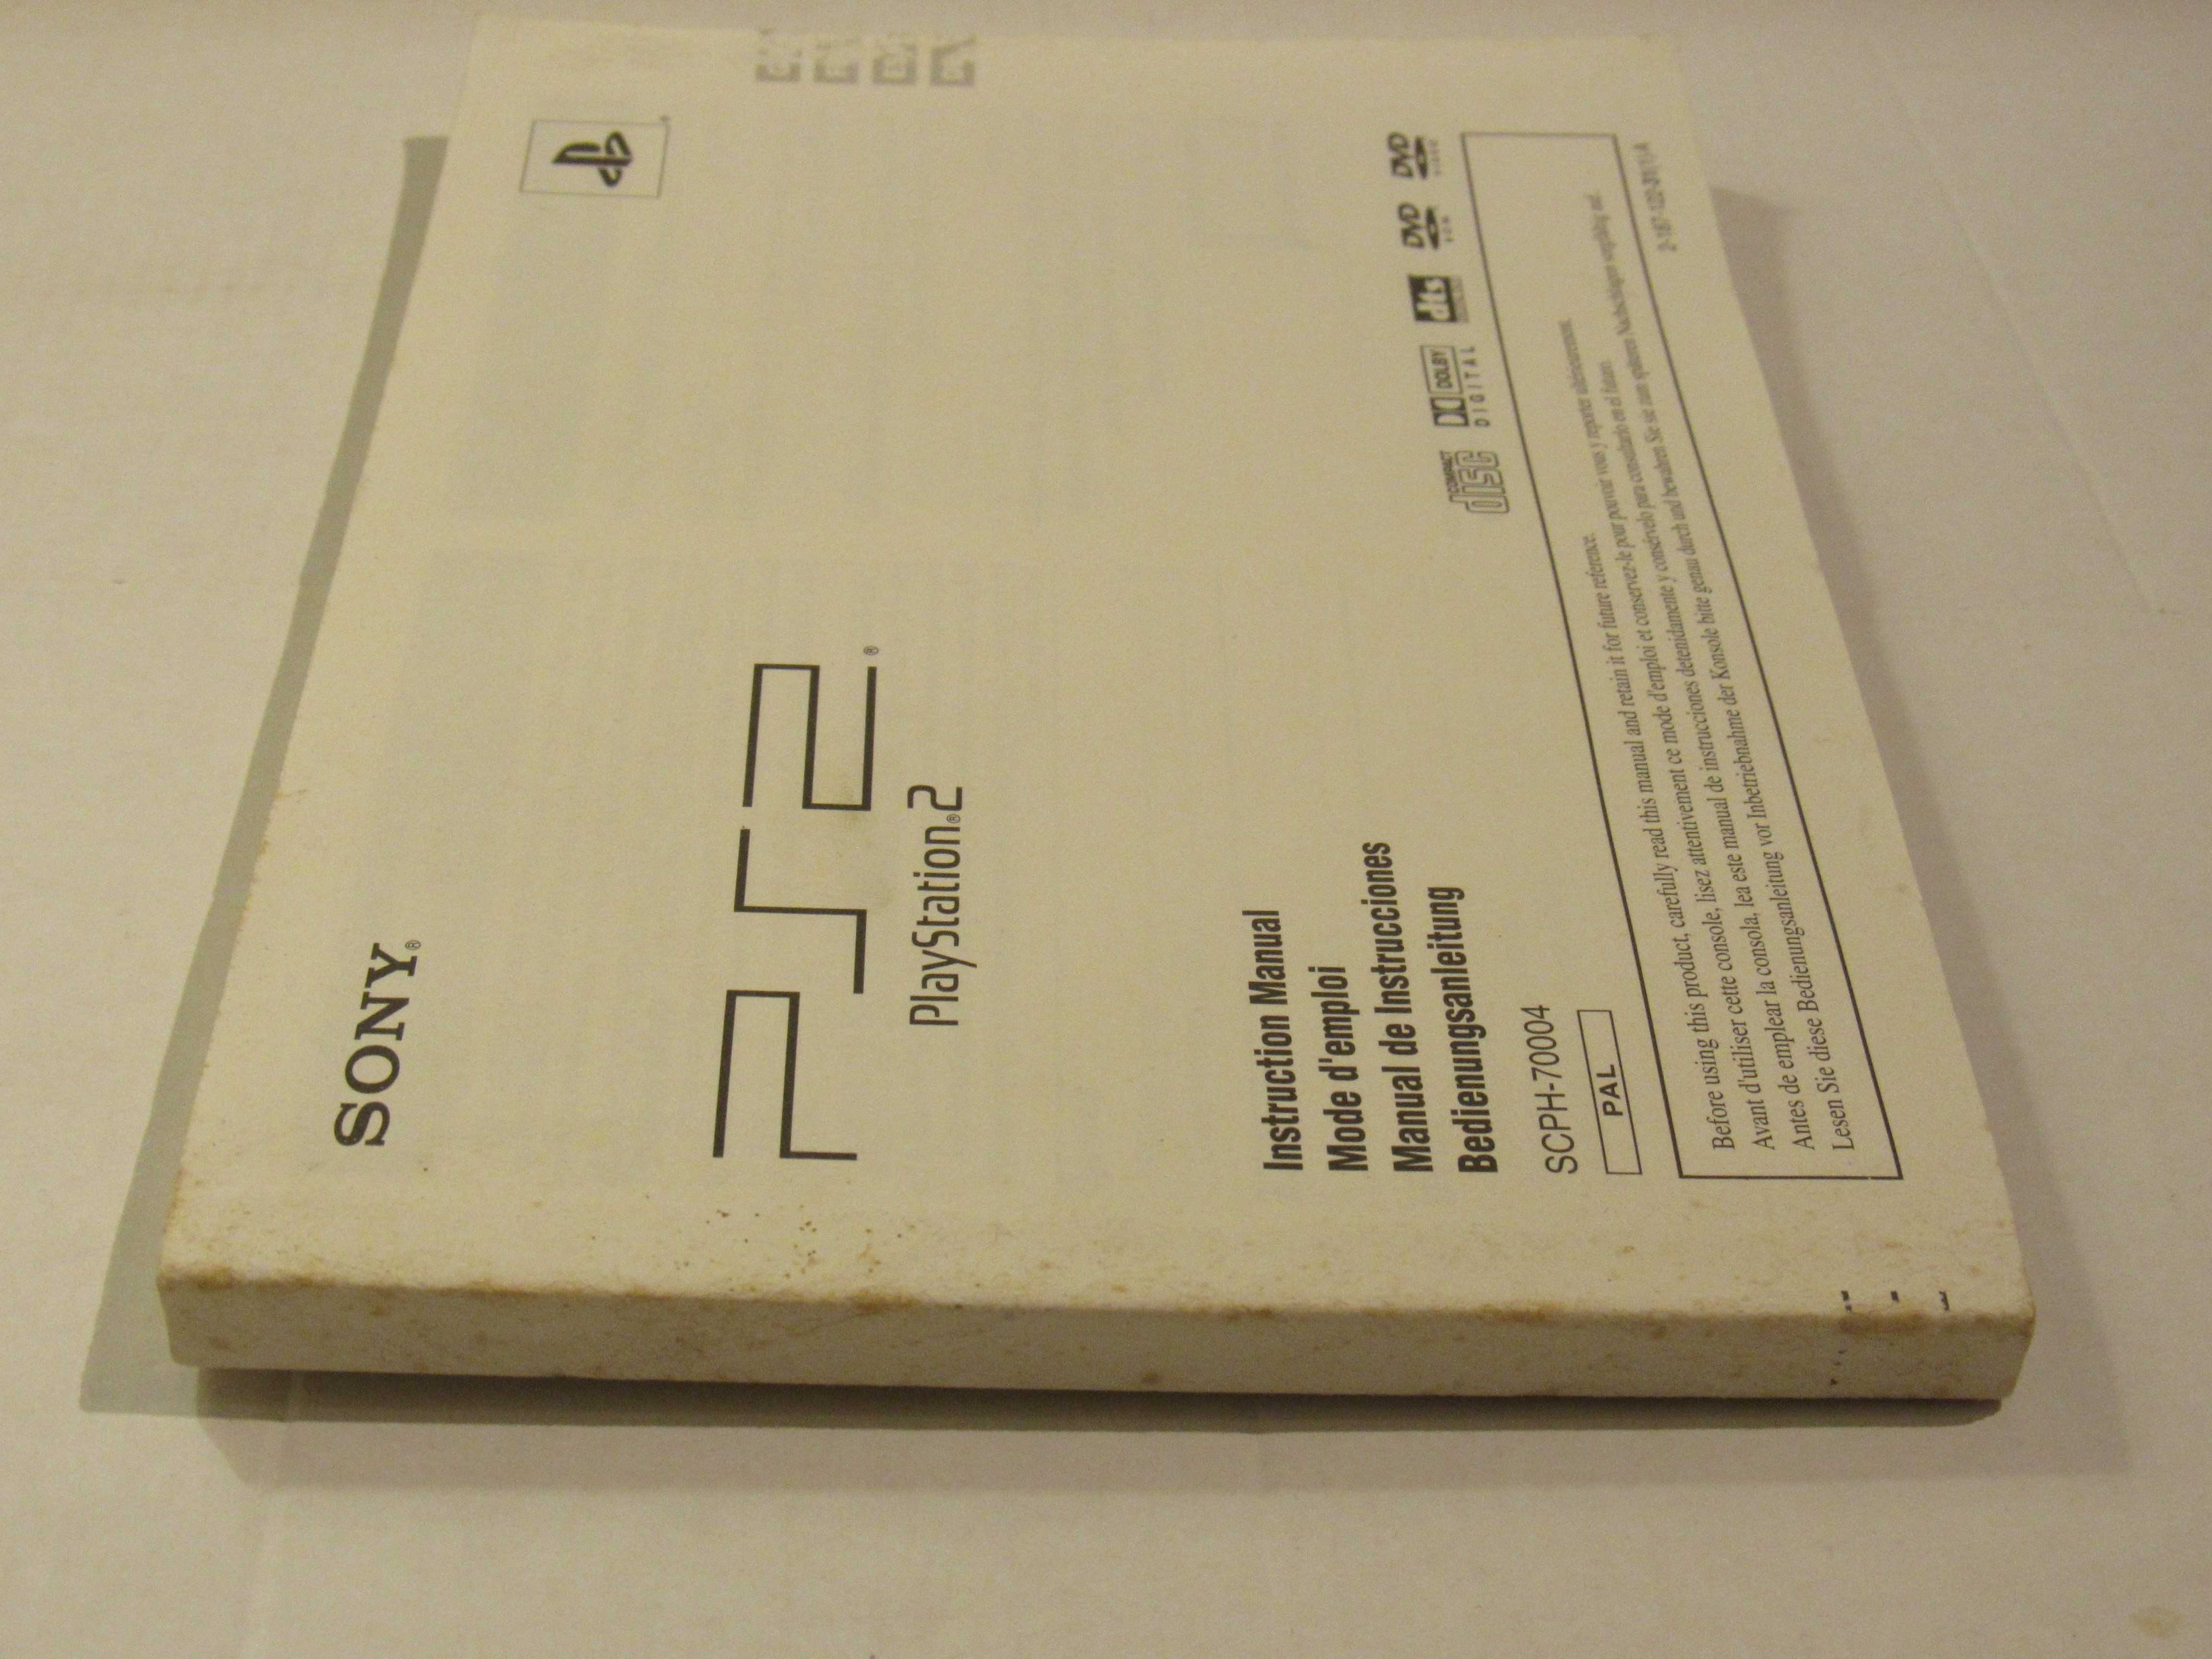 ORIGINAL SONY PLAYSTATION•2/PS2 CONSOLE INSTRUCTION MANUAL (SCPH